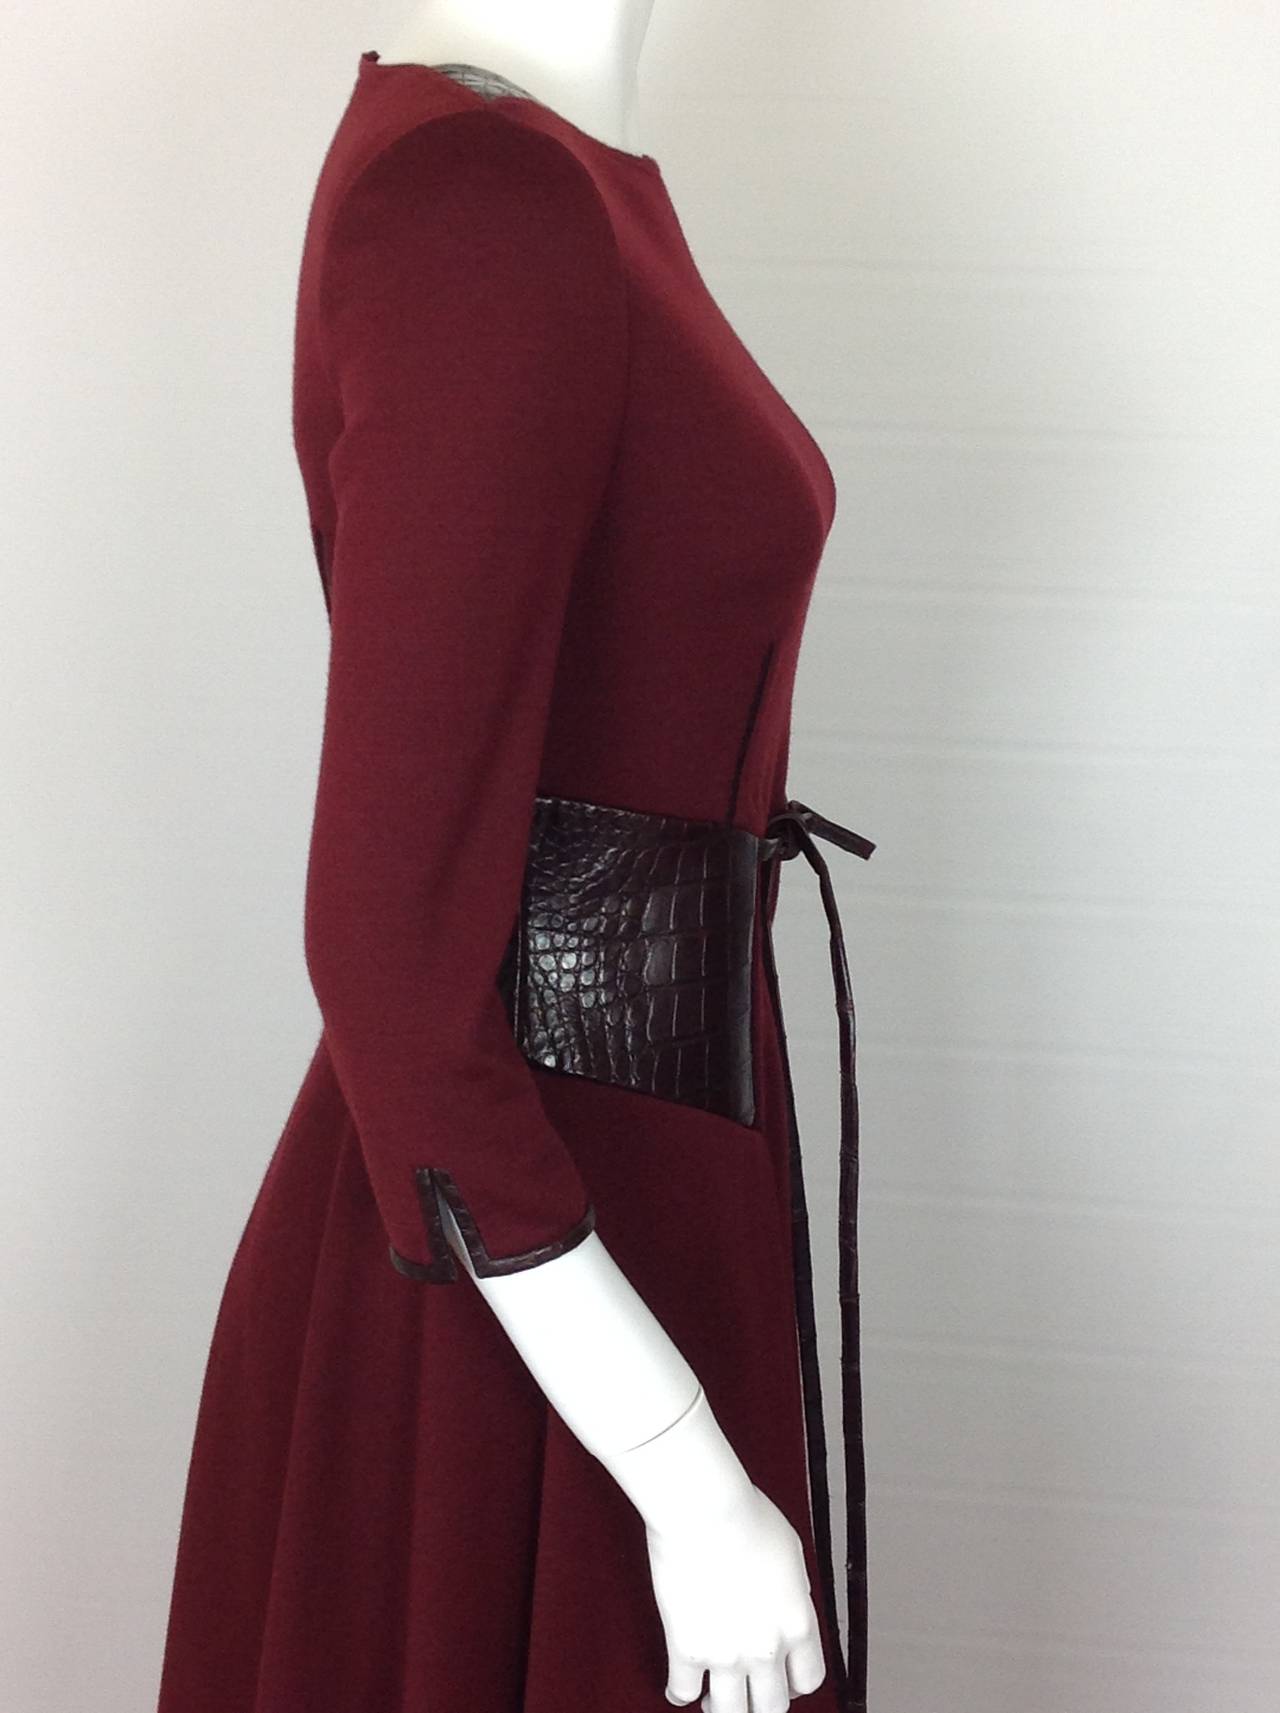 Ralph Rucci dress trimmed in leather 1